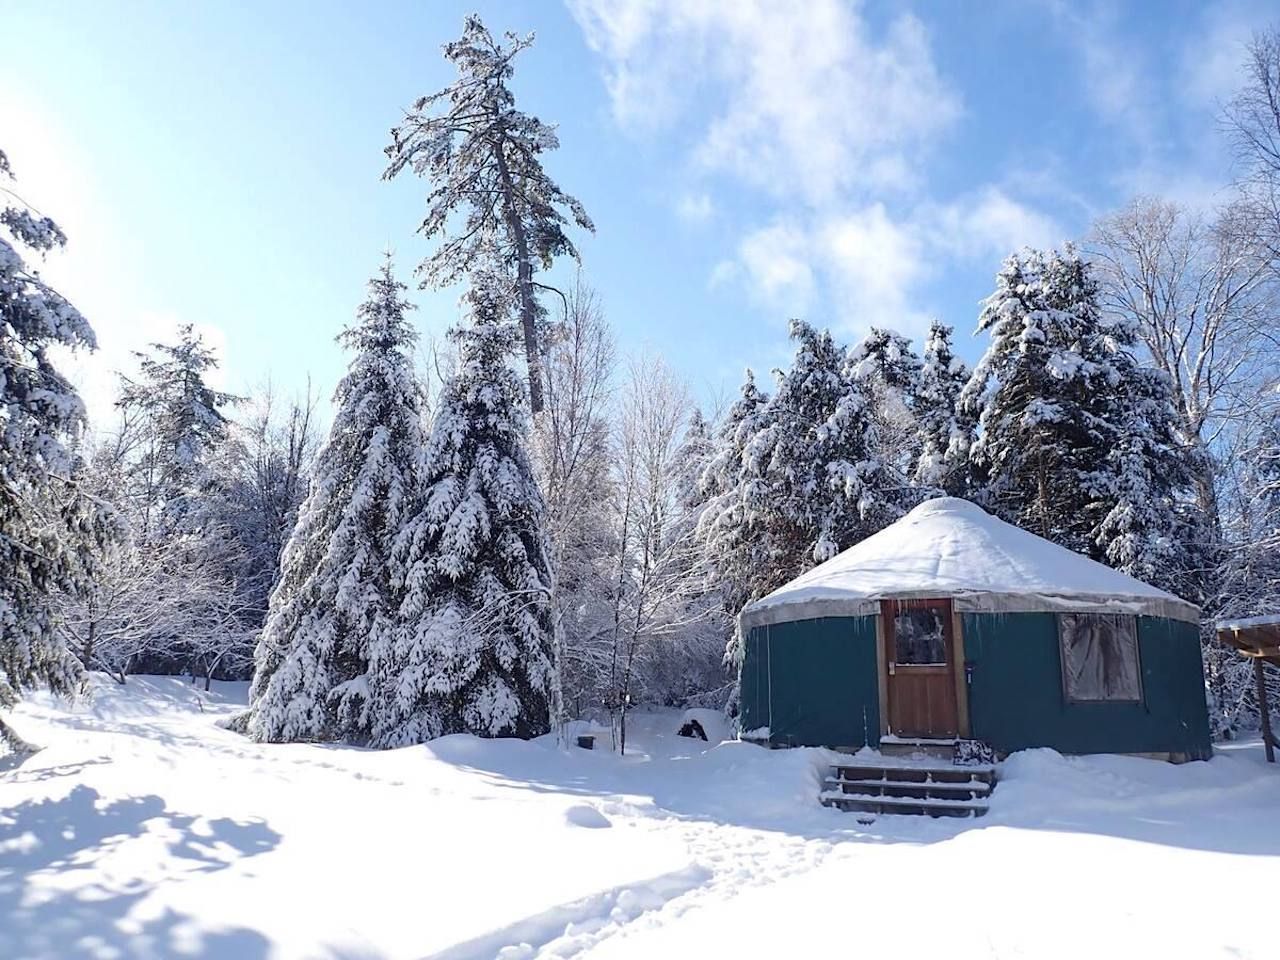 A teal yurt in the snowy woods outside of Montpelier, Vermont